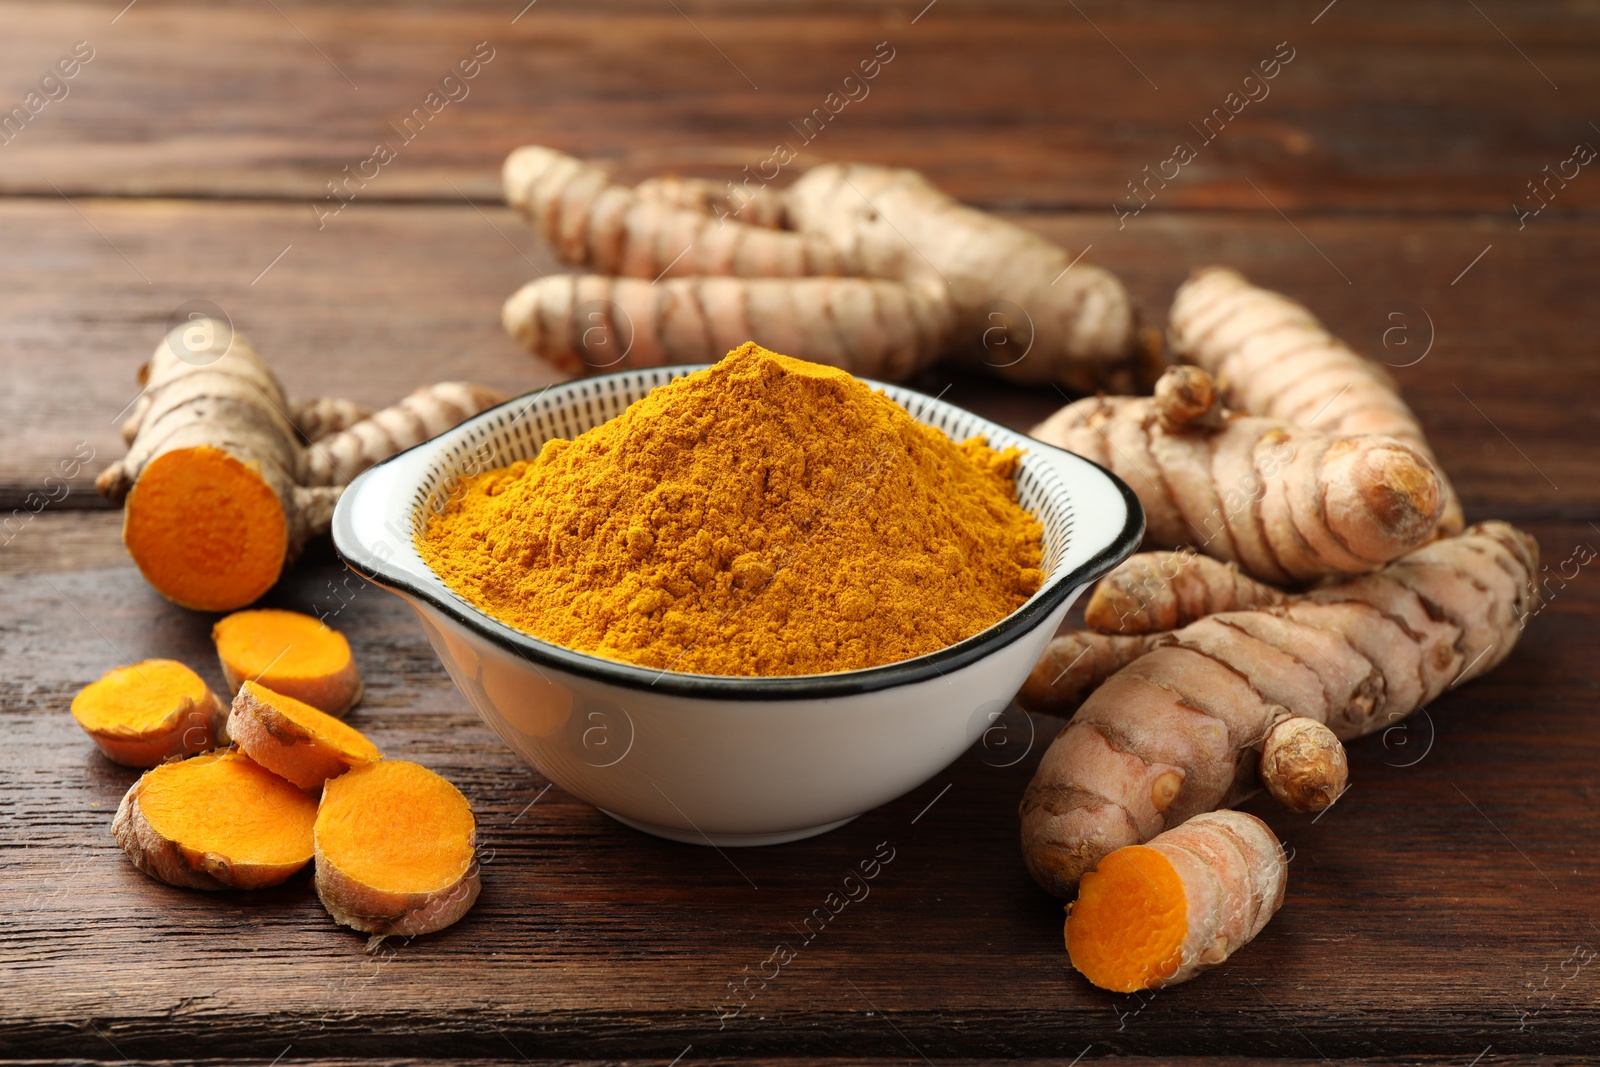 Photo of Bowl with aromatic turmeric powder and cut roots on wooden table